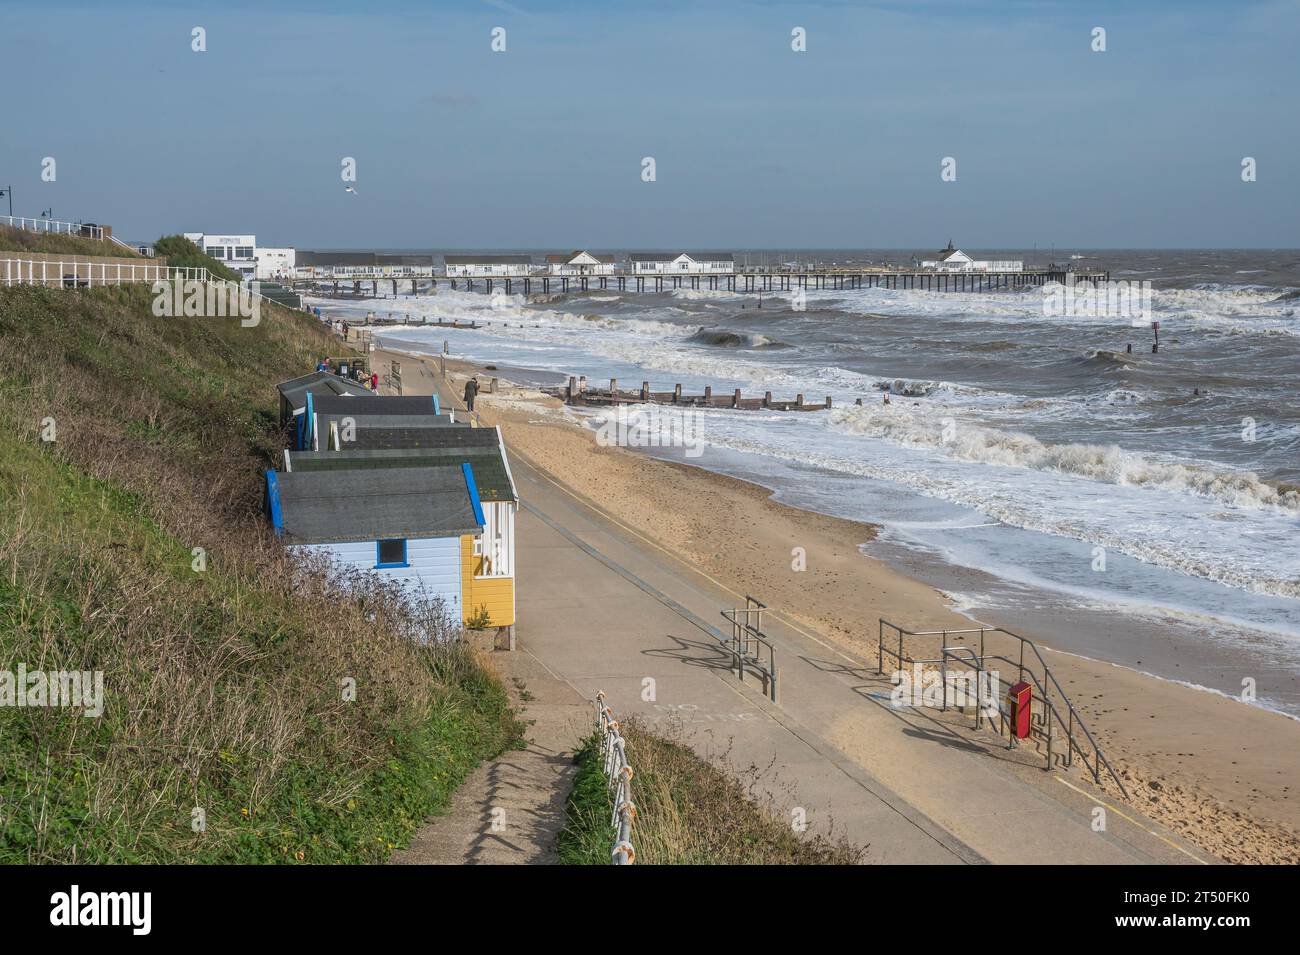 The image of Southwold promenade with its colourful beach huts looking towards Southwold Pier at the coastal resort town of Southwold in Suffolk Stock Photo